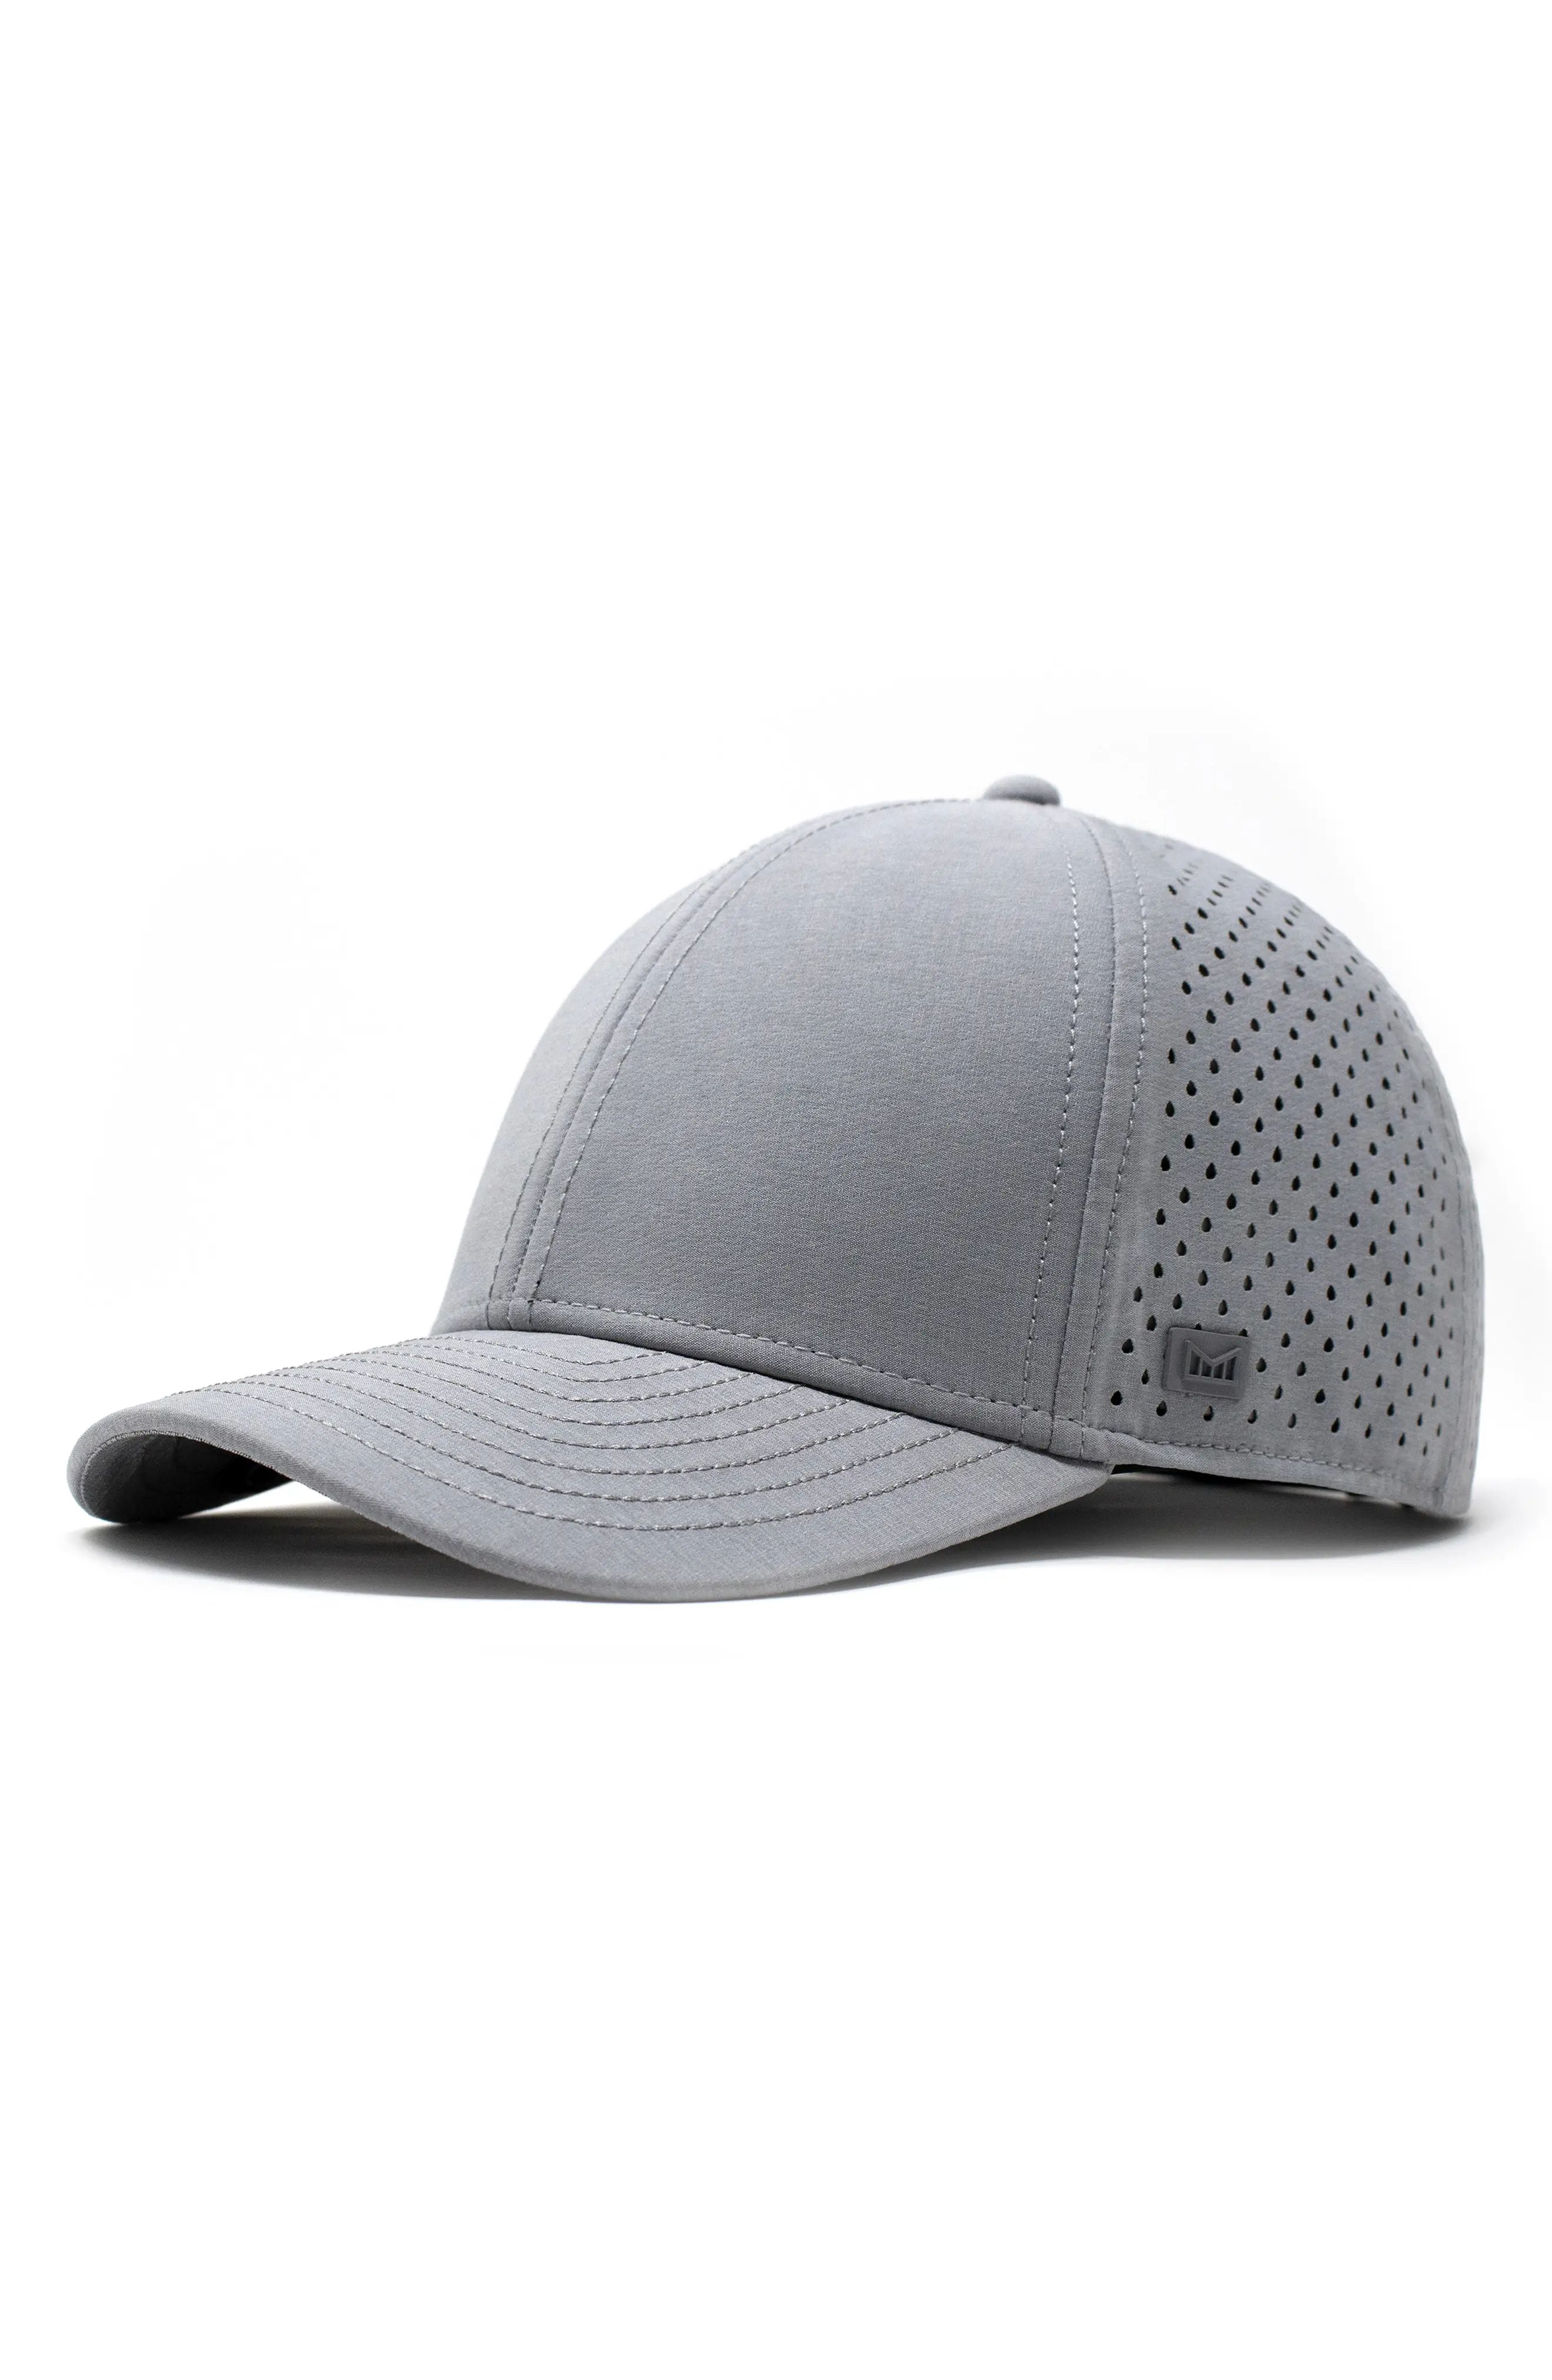 Melin Hydro A-Game Snapback Baseball Cap in Heather Grey at Nordstrom, Size Small | Nordstrom